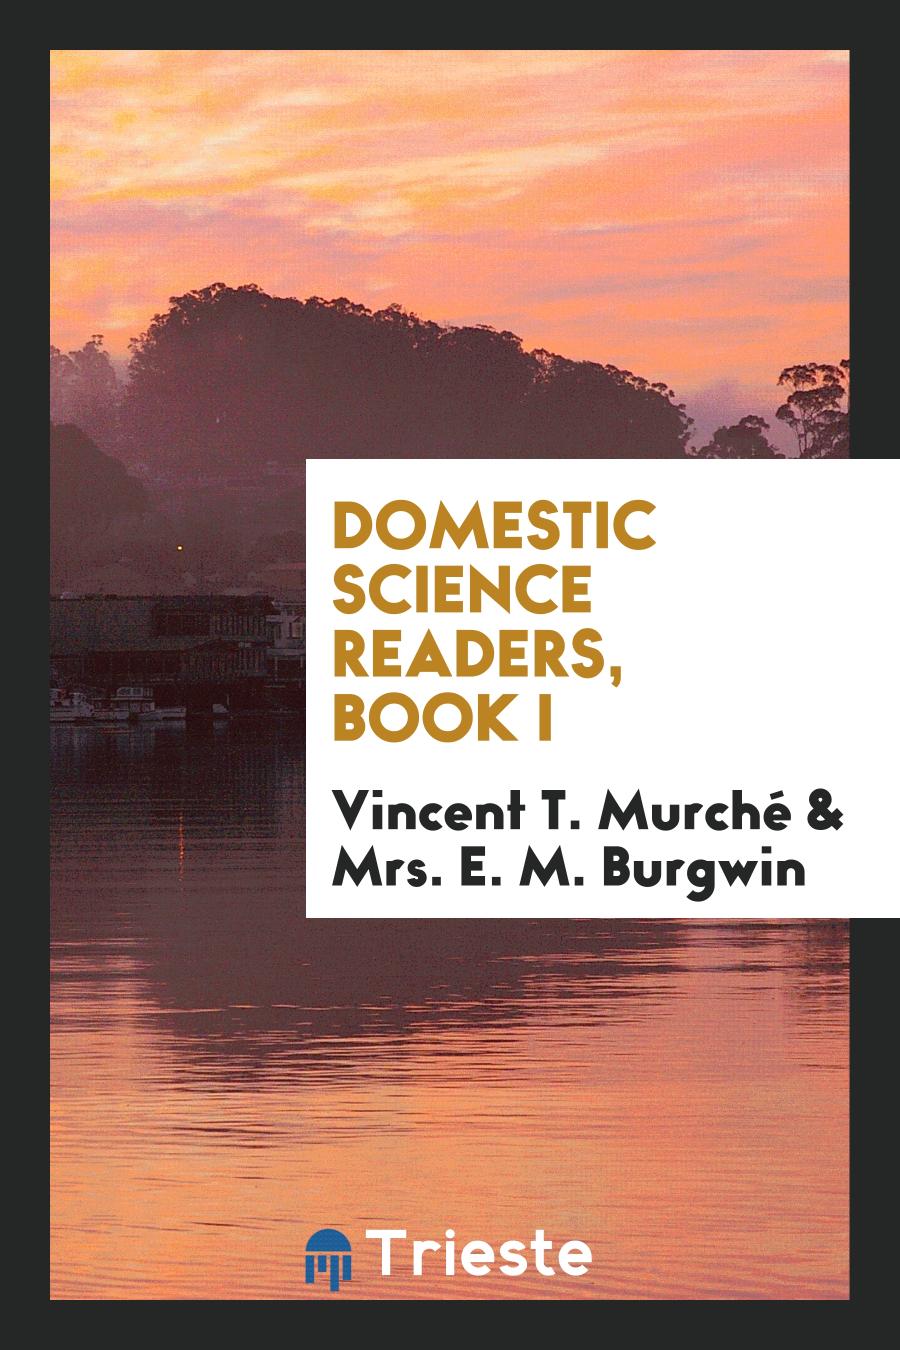 Domestic Science Readers, Book I